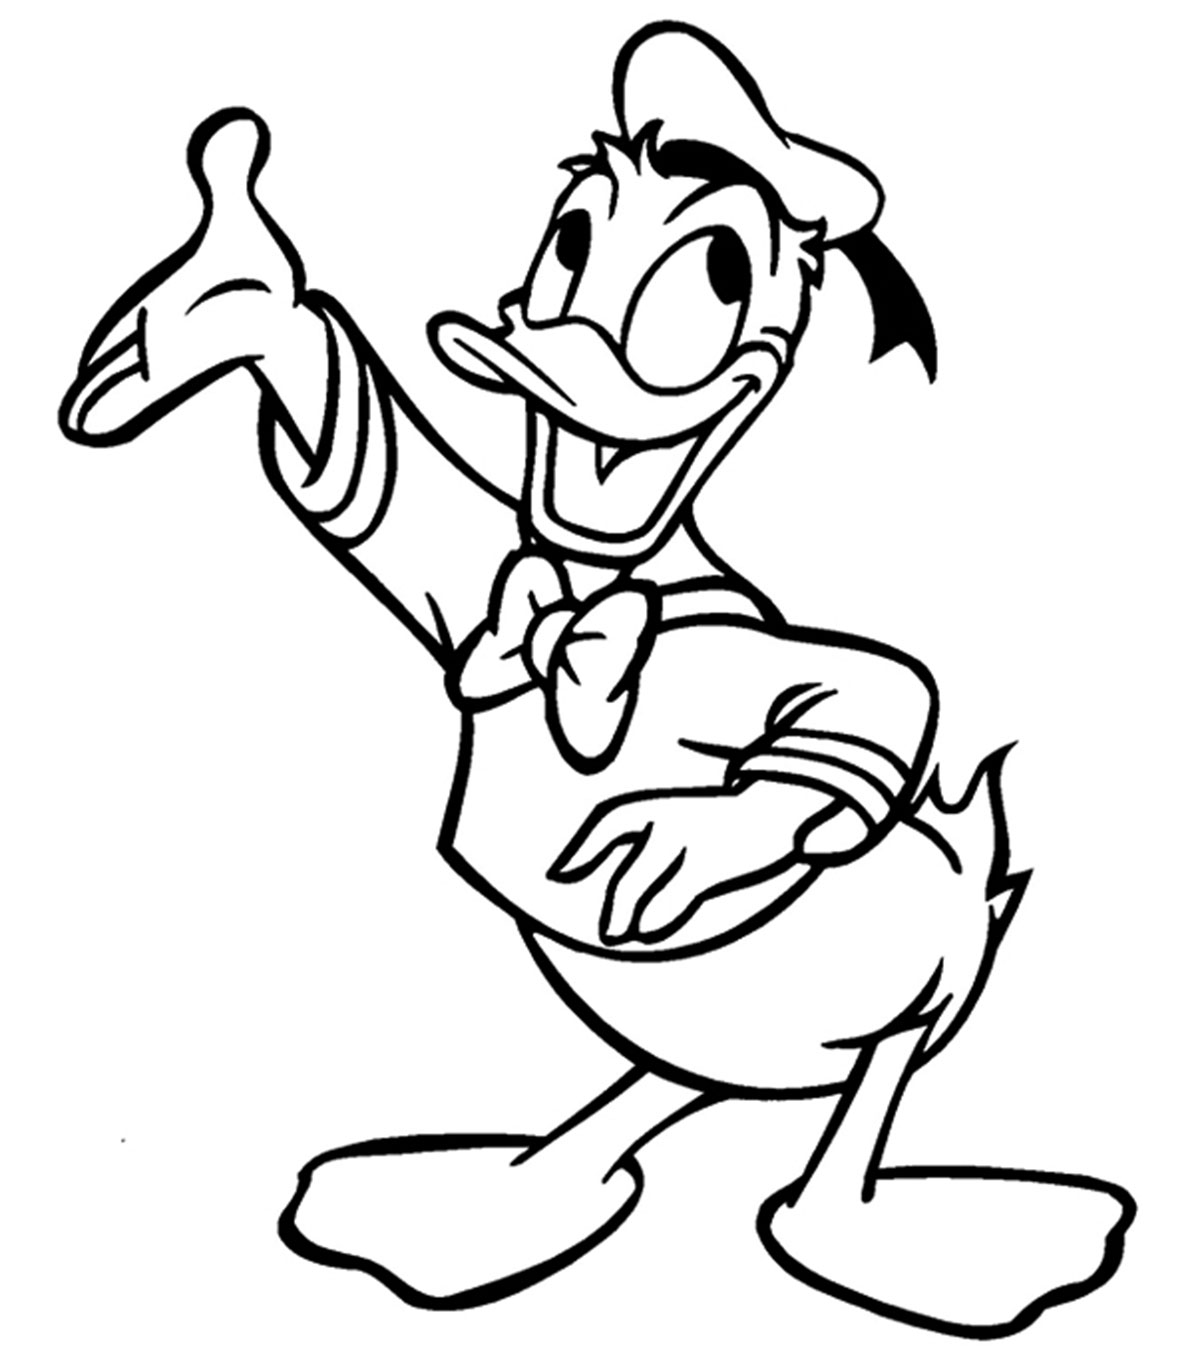 Download Top 25 Free Printable Donald Duck Coloring Pages Online